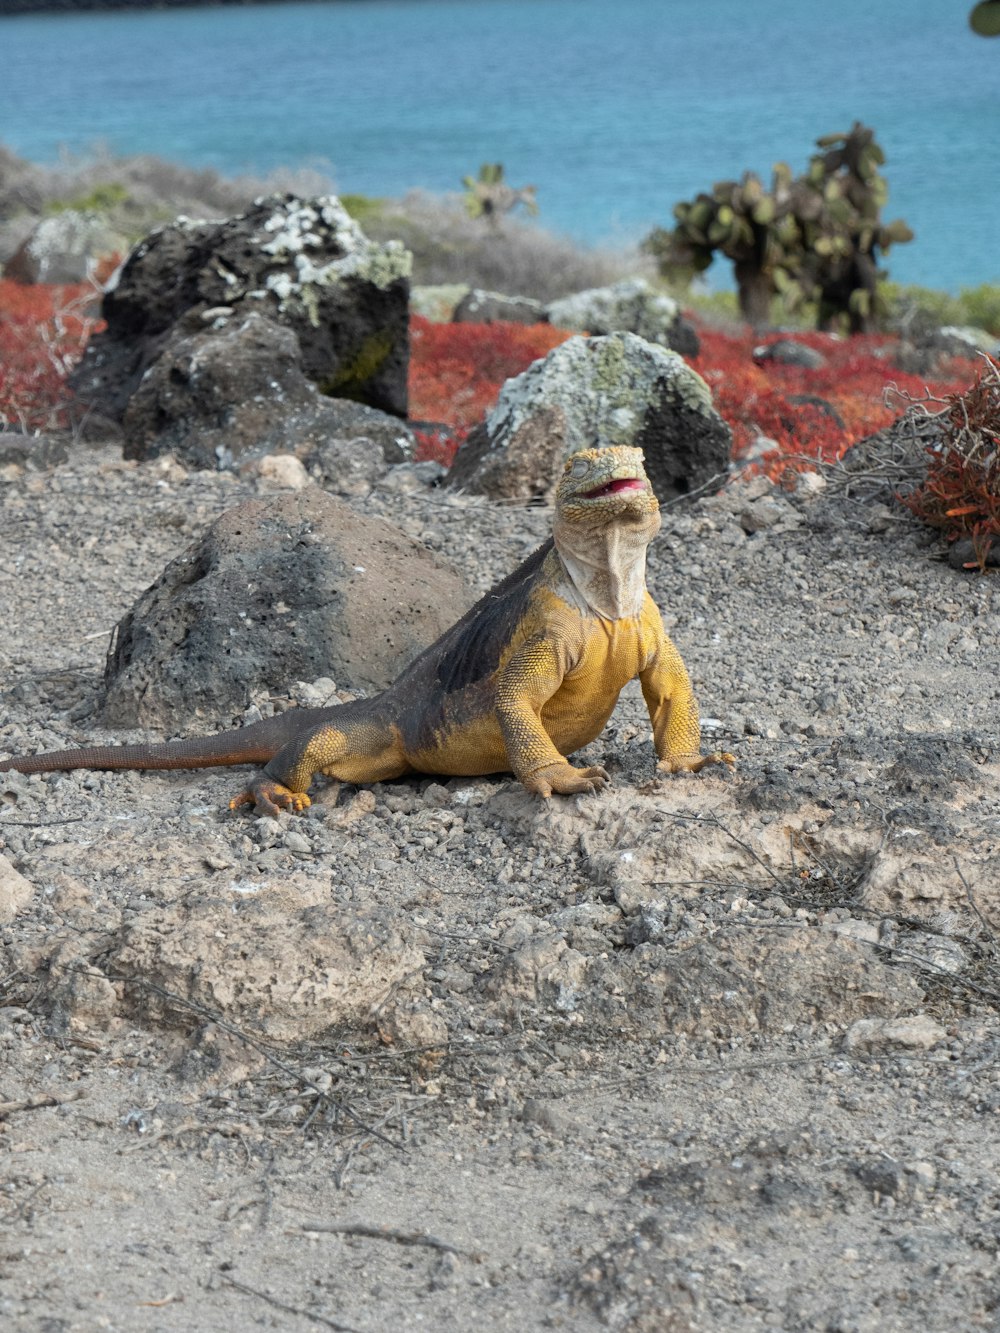 brown and black bearded dragon on gray rocky ground during daytime